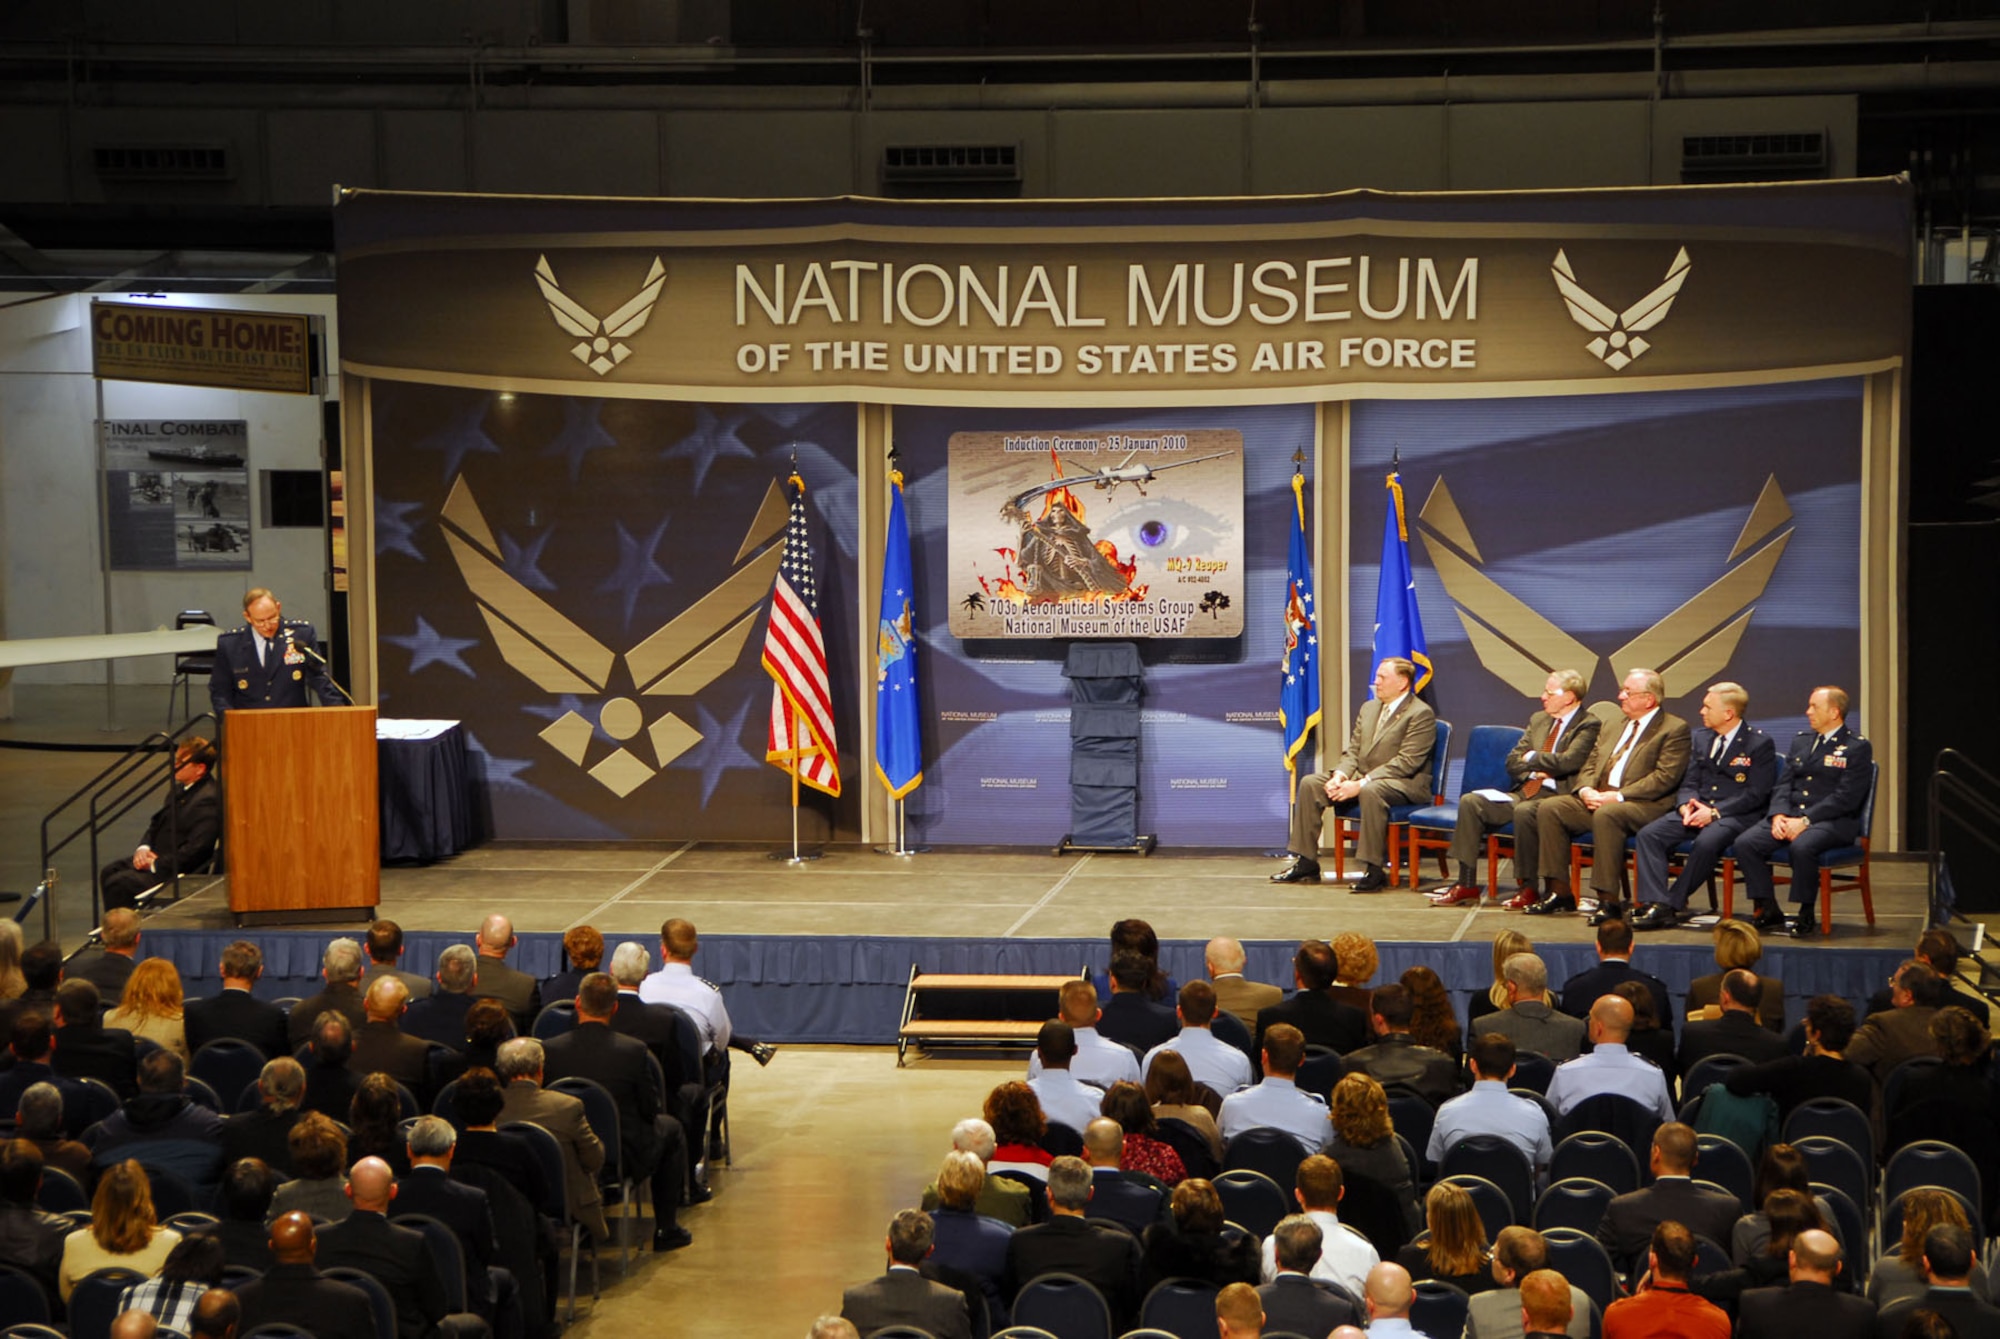 DAYTON, Ohio -- Lt. Gen. David A. Deptula, the Air Force’s Deputy Chief of Staff for Intelligence, Surveillance and Reconnaissance, addresses the audience during the MQ-9 Reaper exhibit opening at the National Museum of the U.S. Air Force on Jan. 25, 2010. (U.S. Air Force photo)